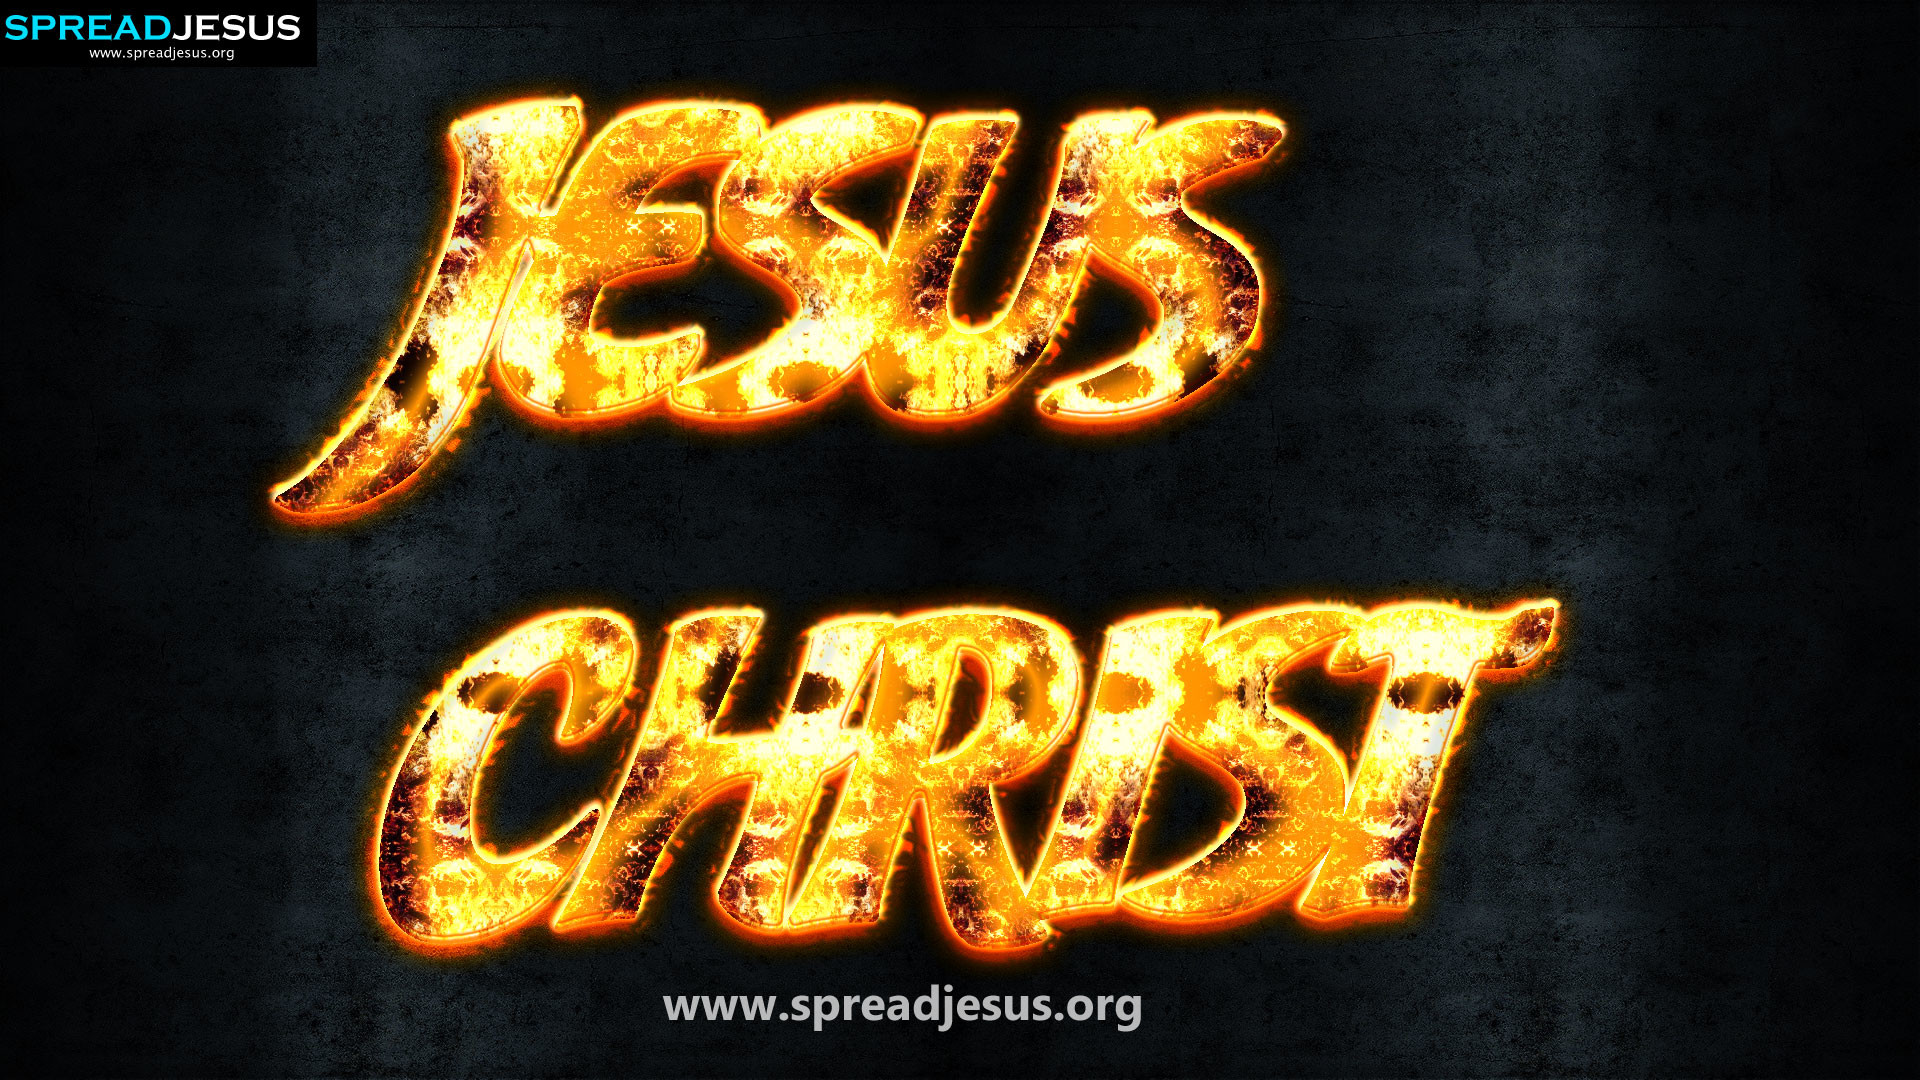 1920x1080 ... CHRIST HD WALLPAPERS DOWNLOAD. VIEW AND DOWNLOAD